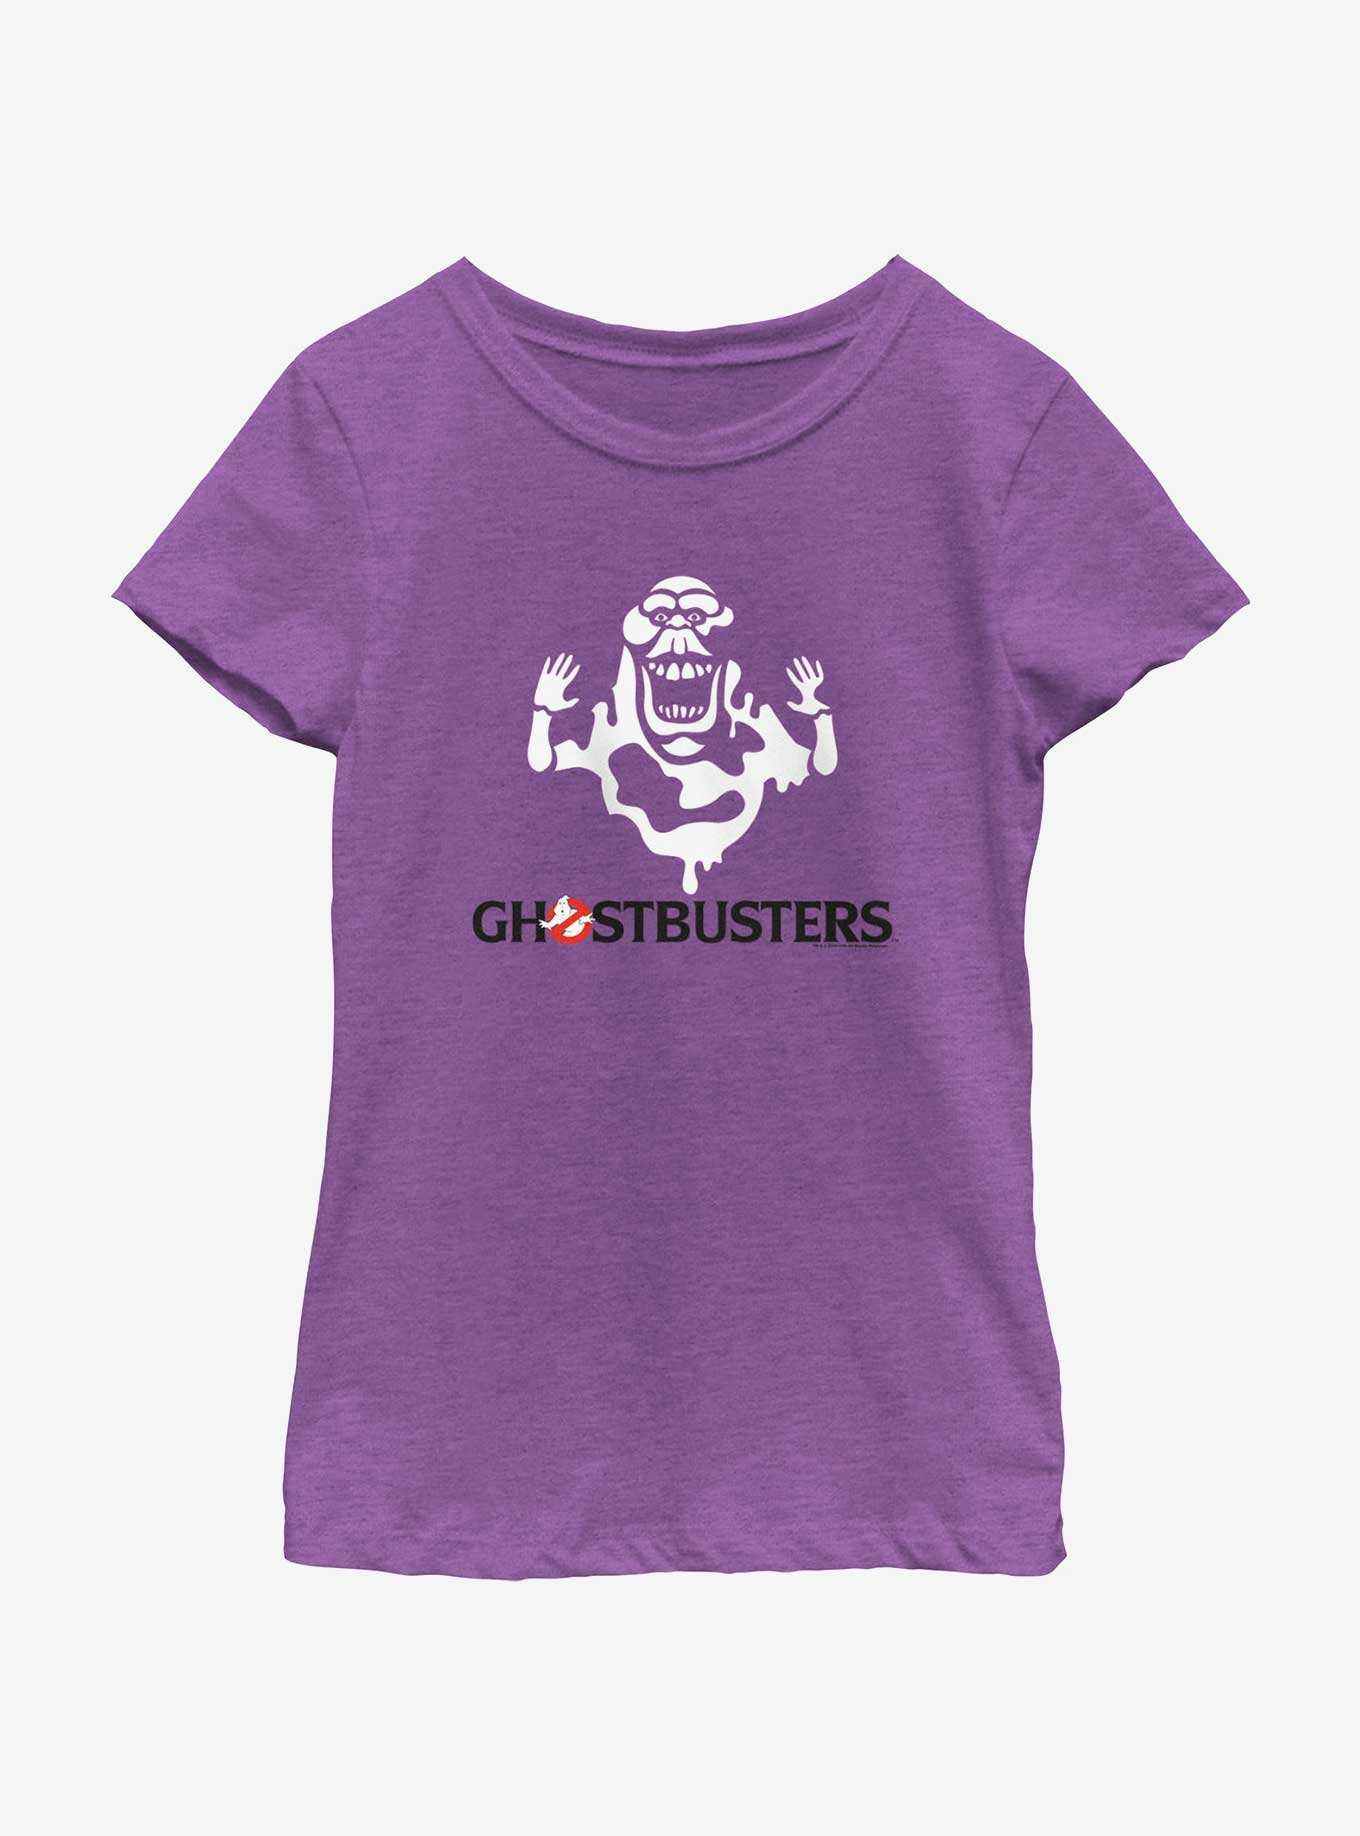 Ghostbusters: Frozen Empire Decal Slimer Girls Youth T-Shirt, , hi-res